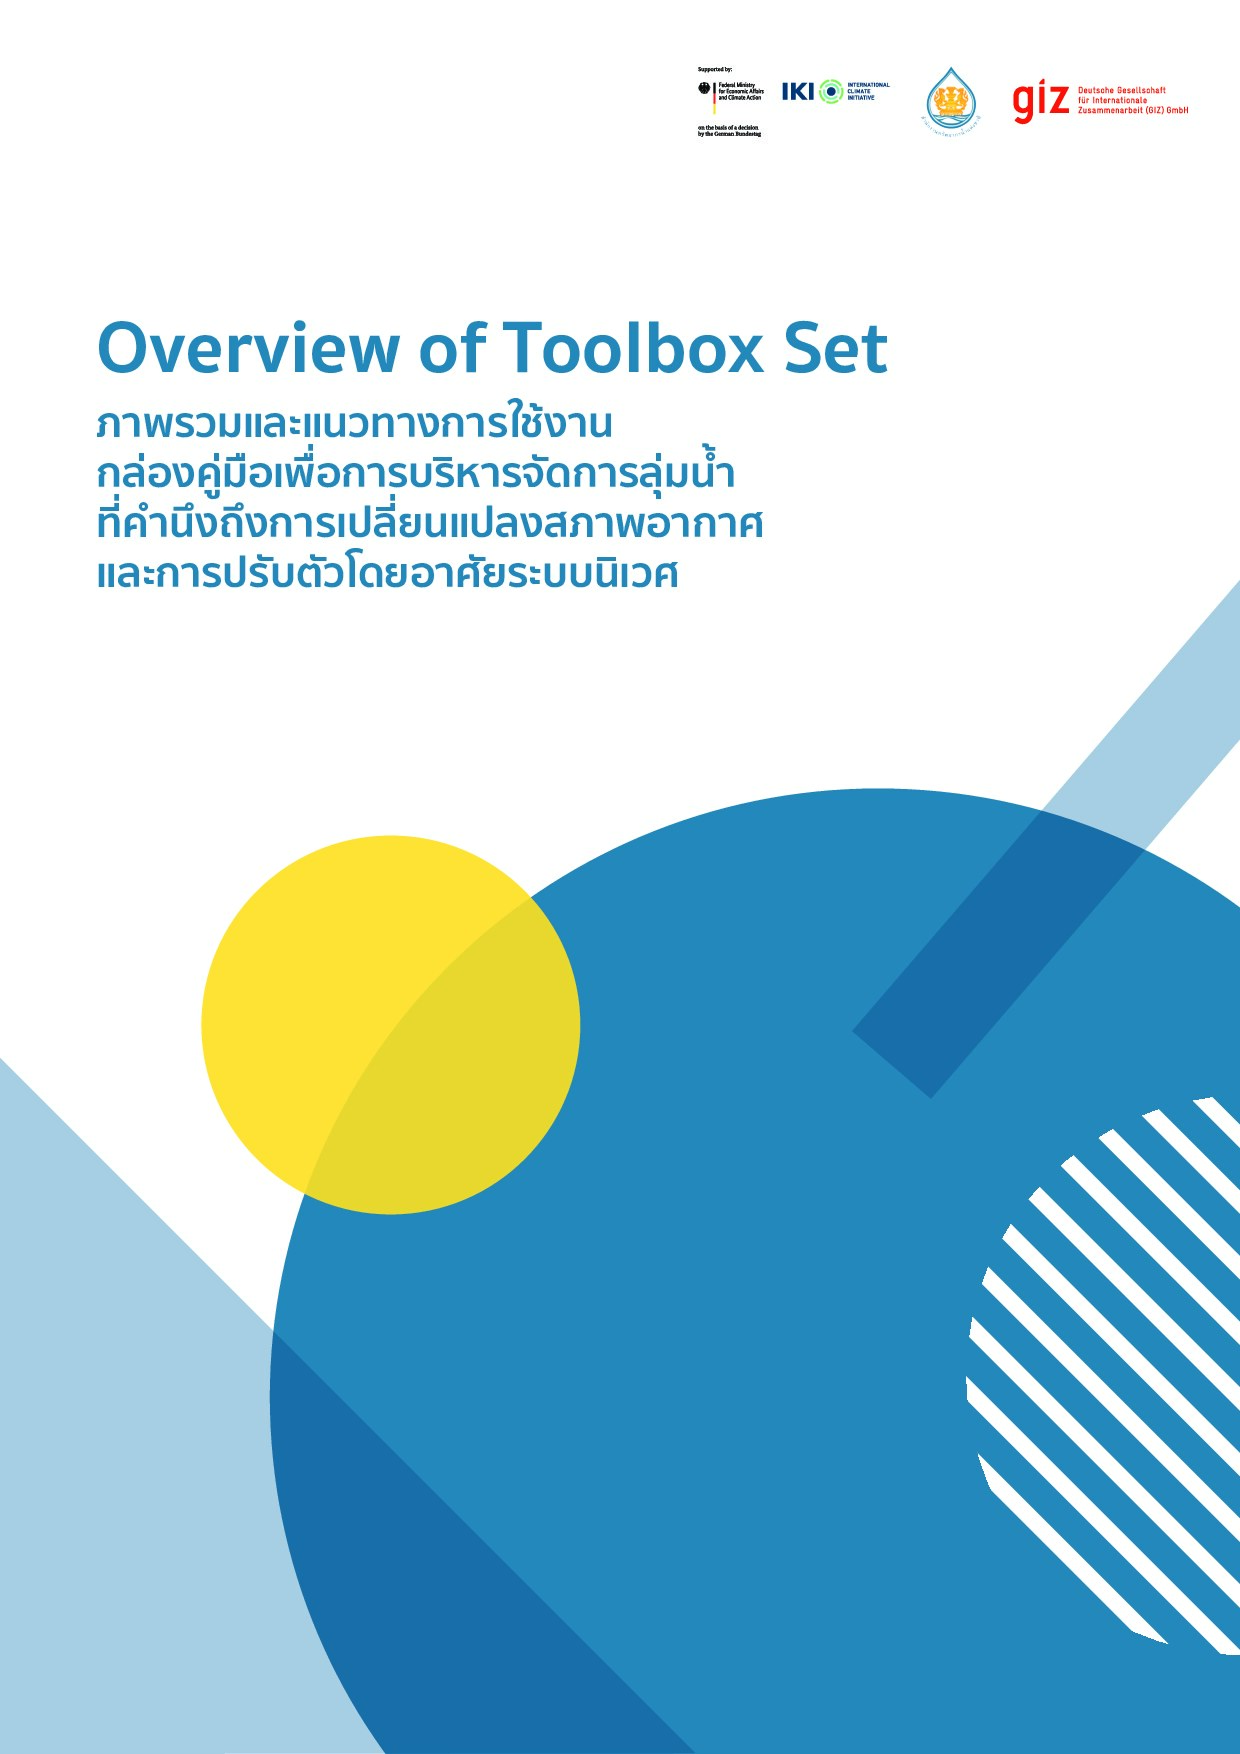 Overview of Toolbox Set